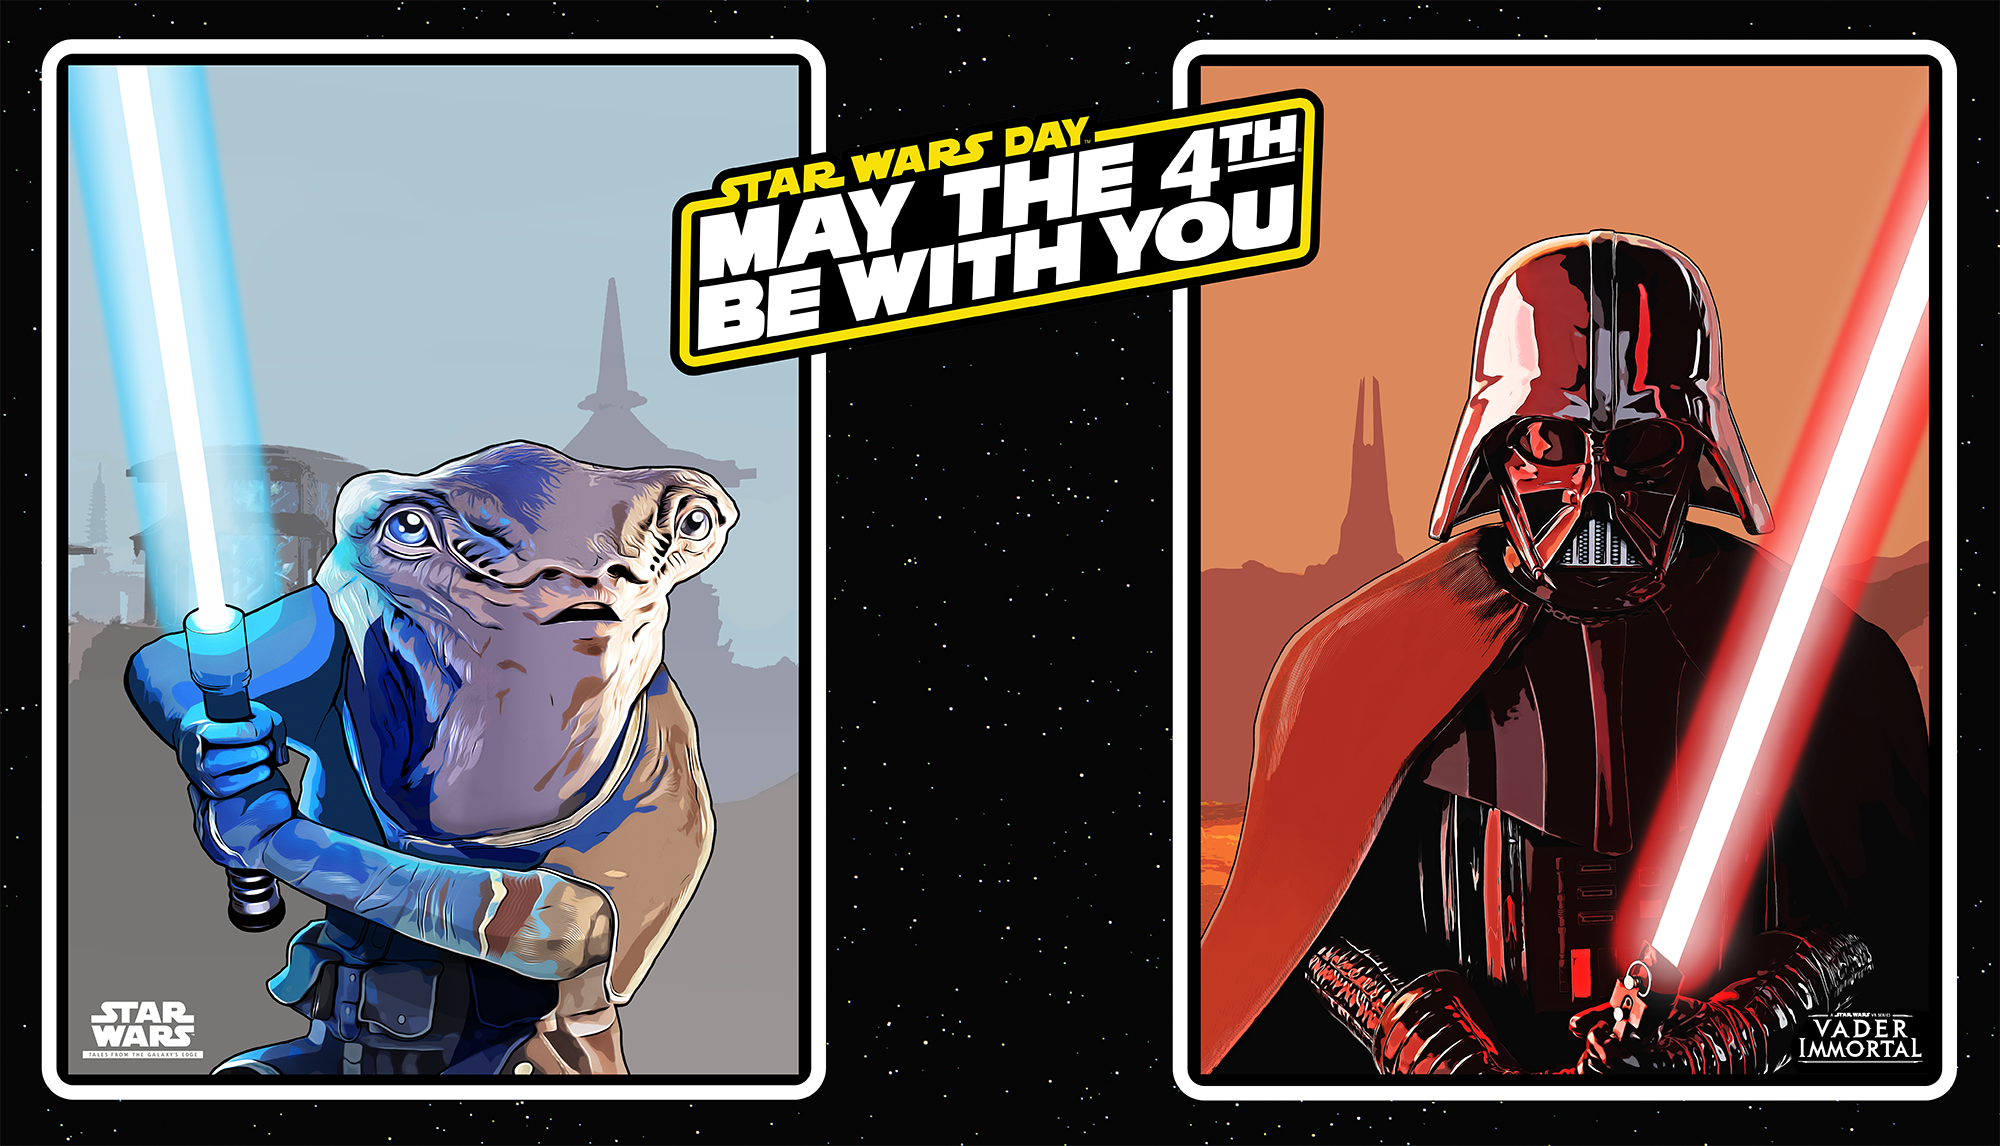 Celebrate May the 4th This Star Wars Day With Us!